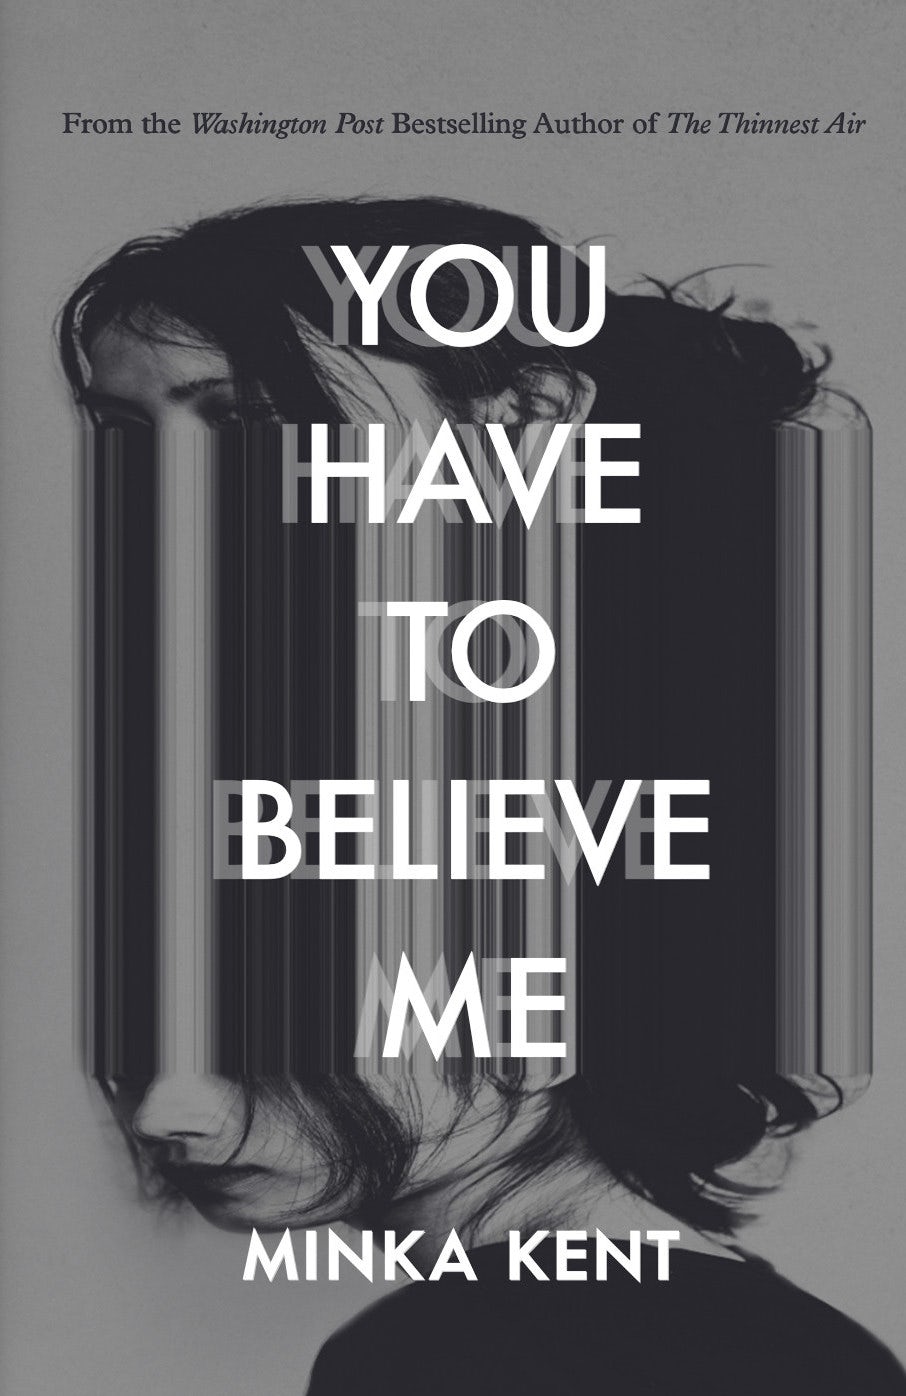 You have to believe me book cover